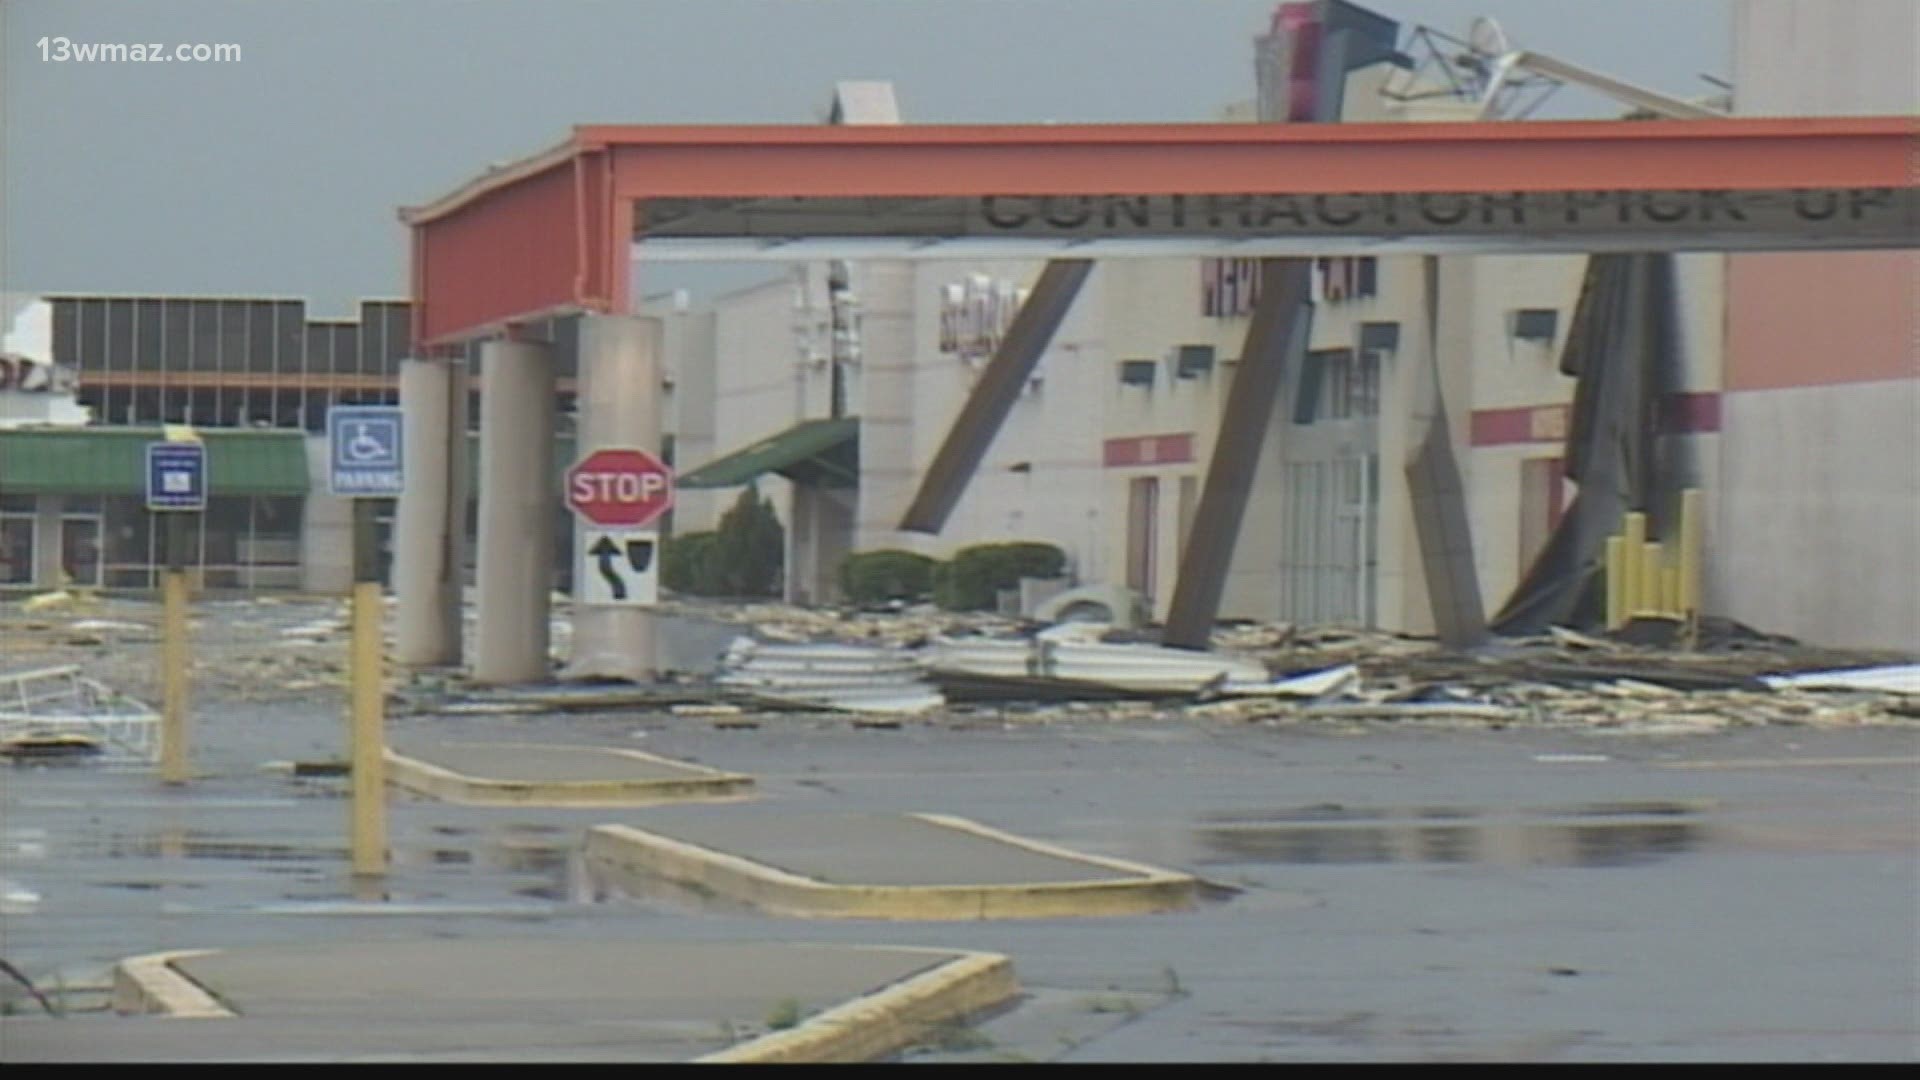 During the early morning hours of May 11, 2008, severe thunderstorms ripped across Georgia producing several tornadoes and widespread damaging wind.